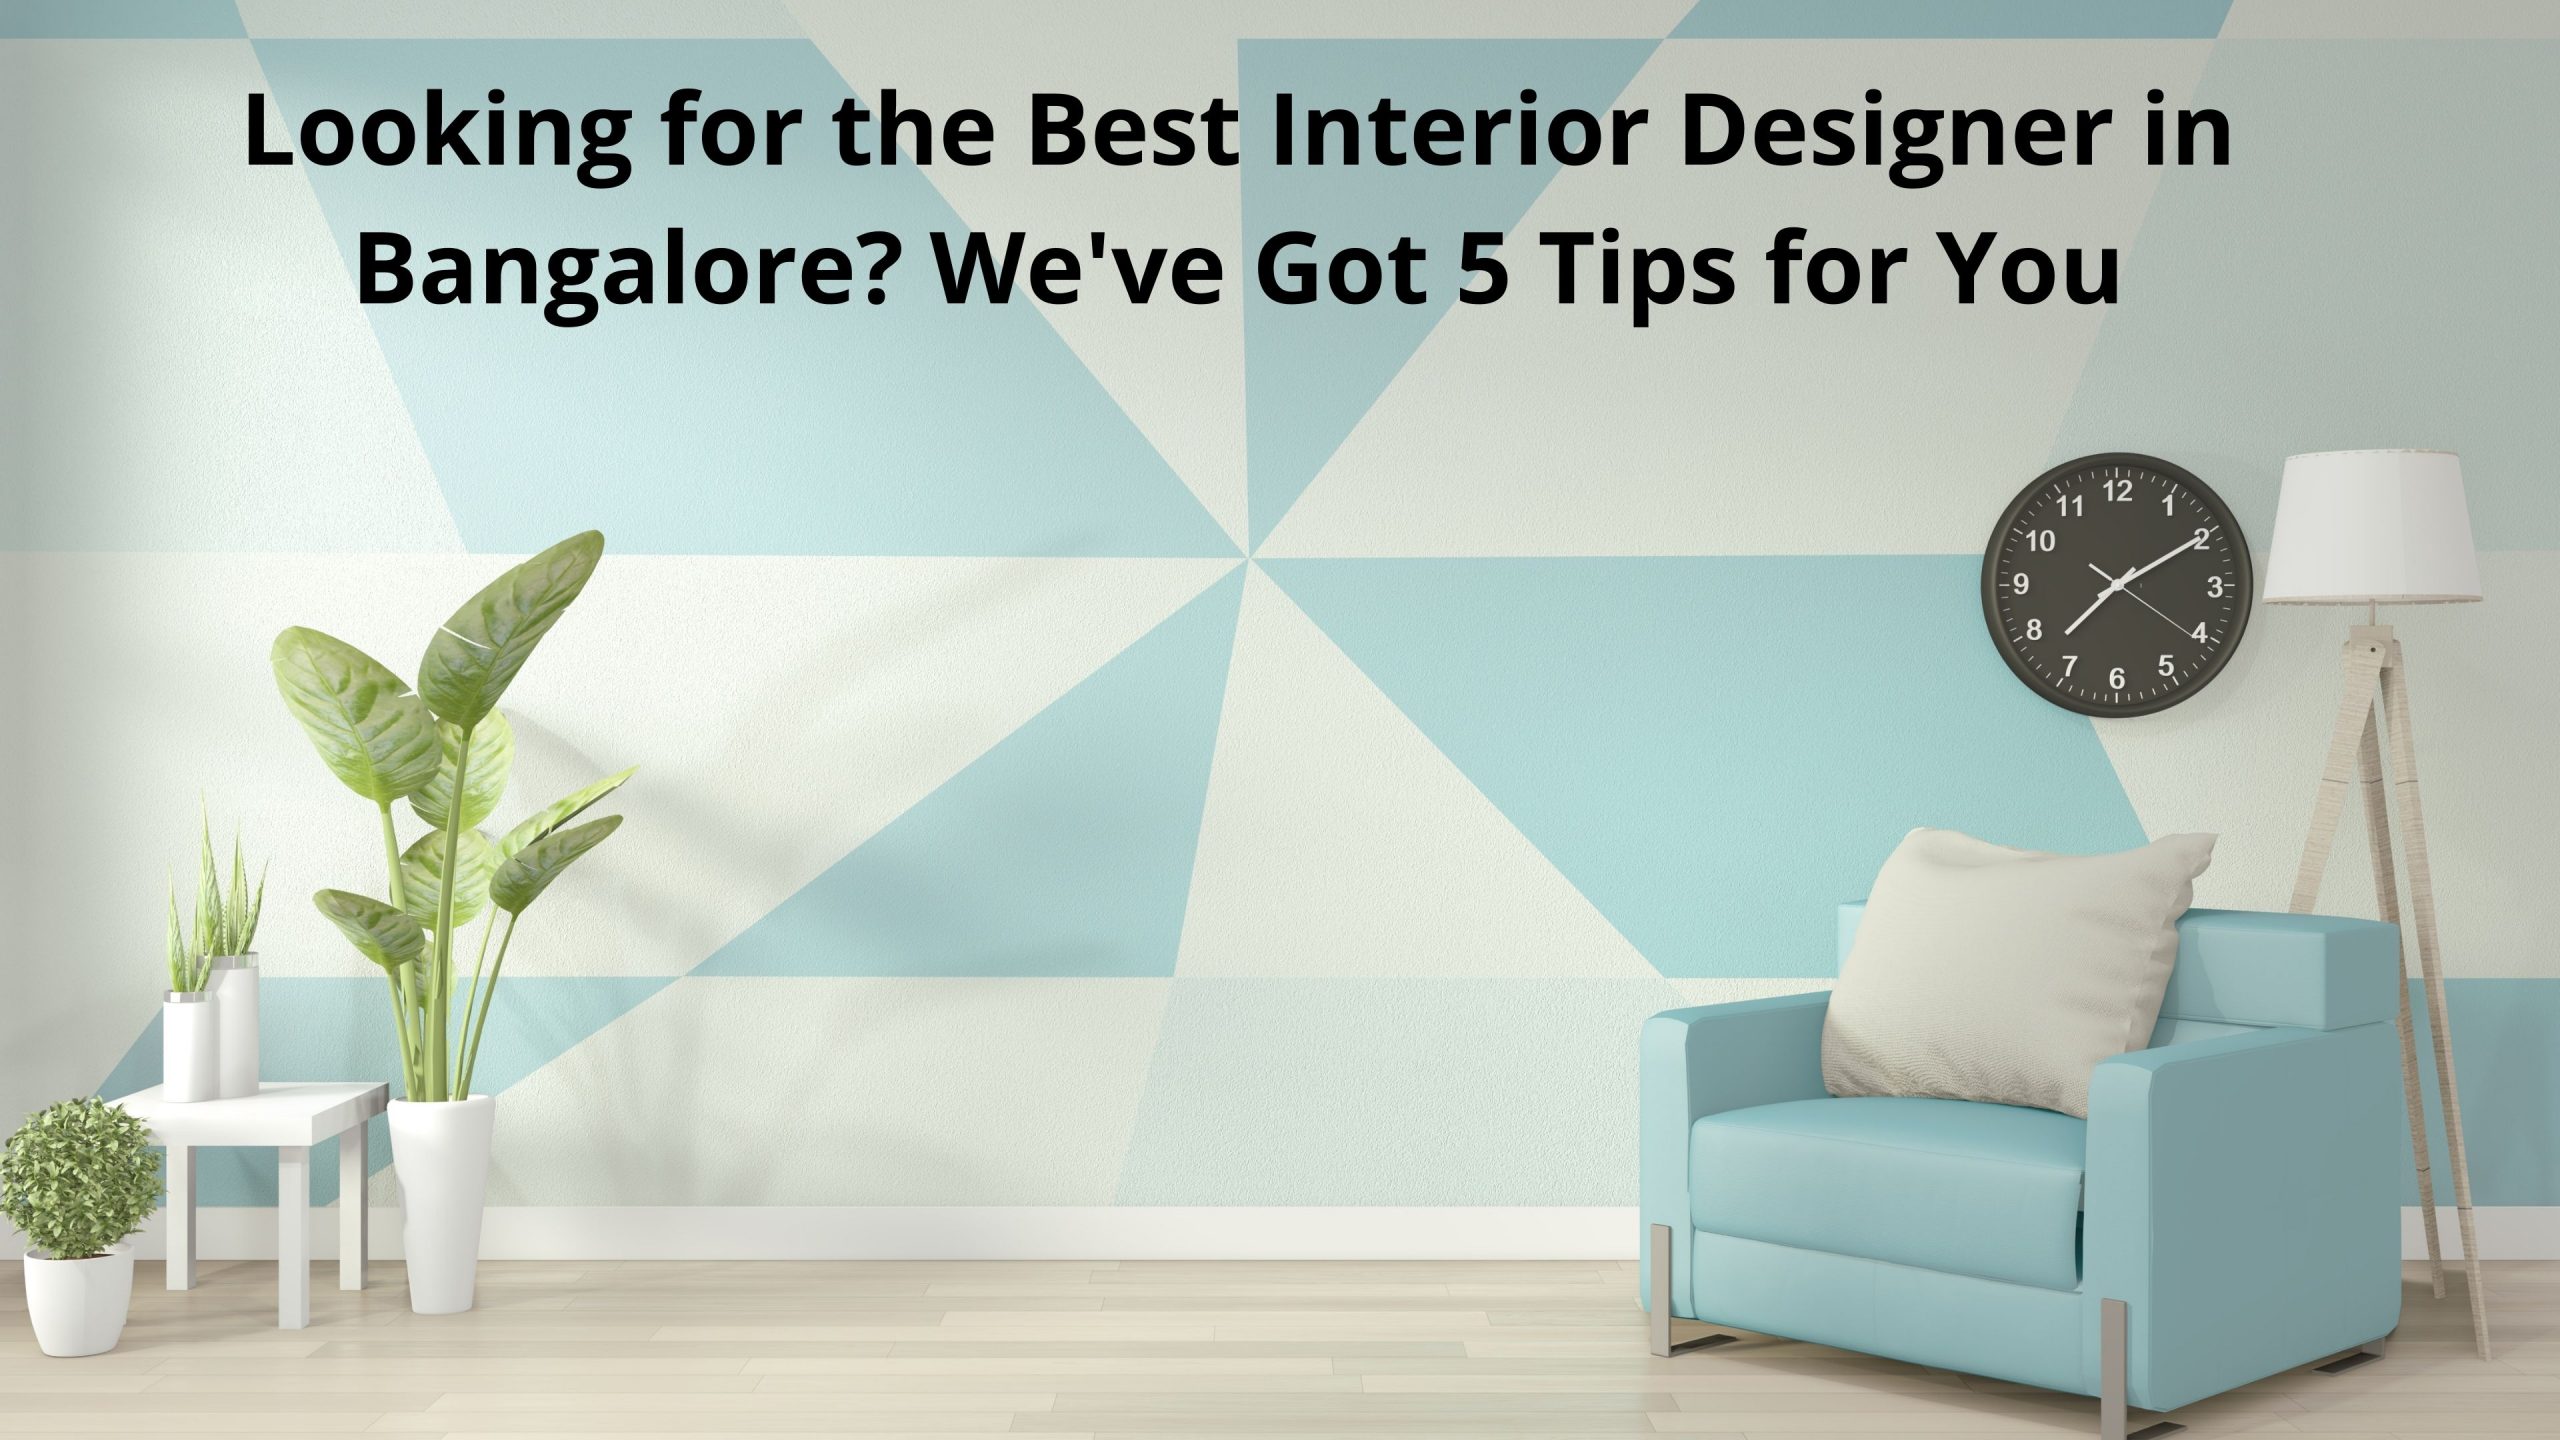 Looking for the Best Interior Designer in Bangalore? We've Got 5 Tips for You